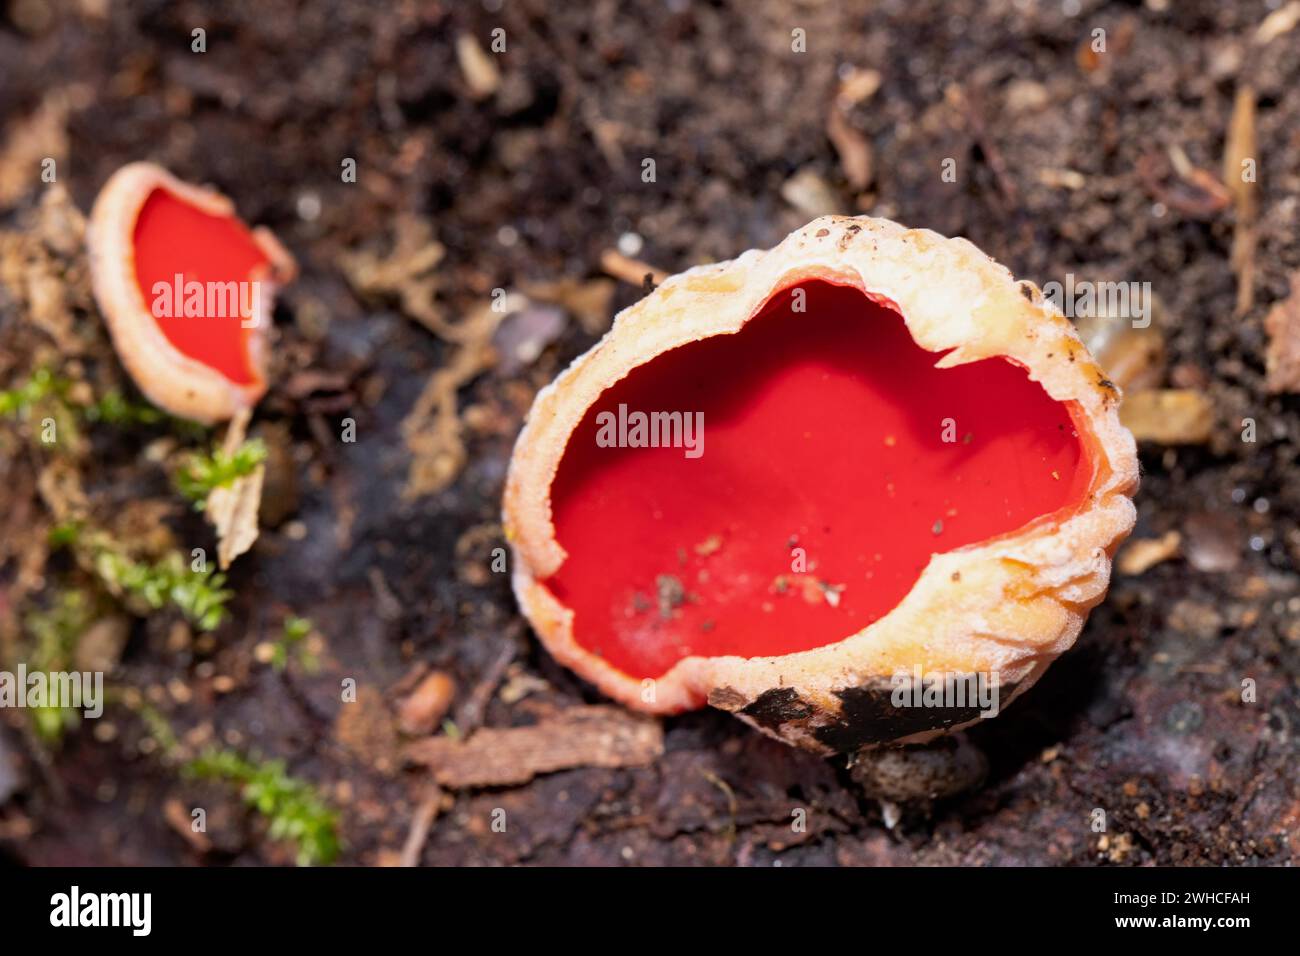 Austrian Goblet two red fruiting bodies next to each other on soil Stock Photo